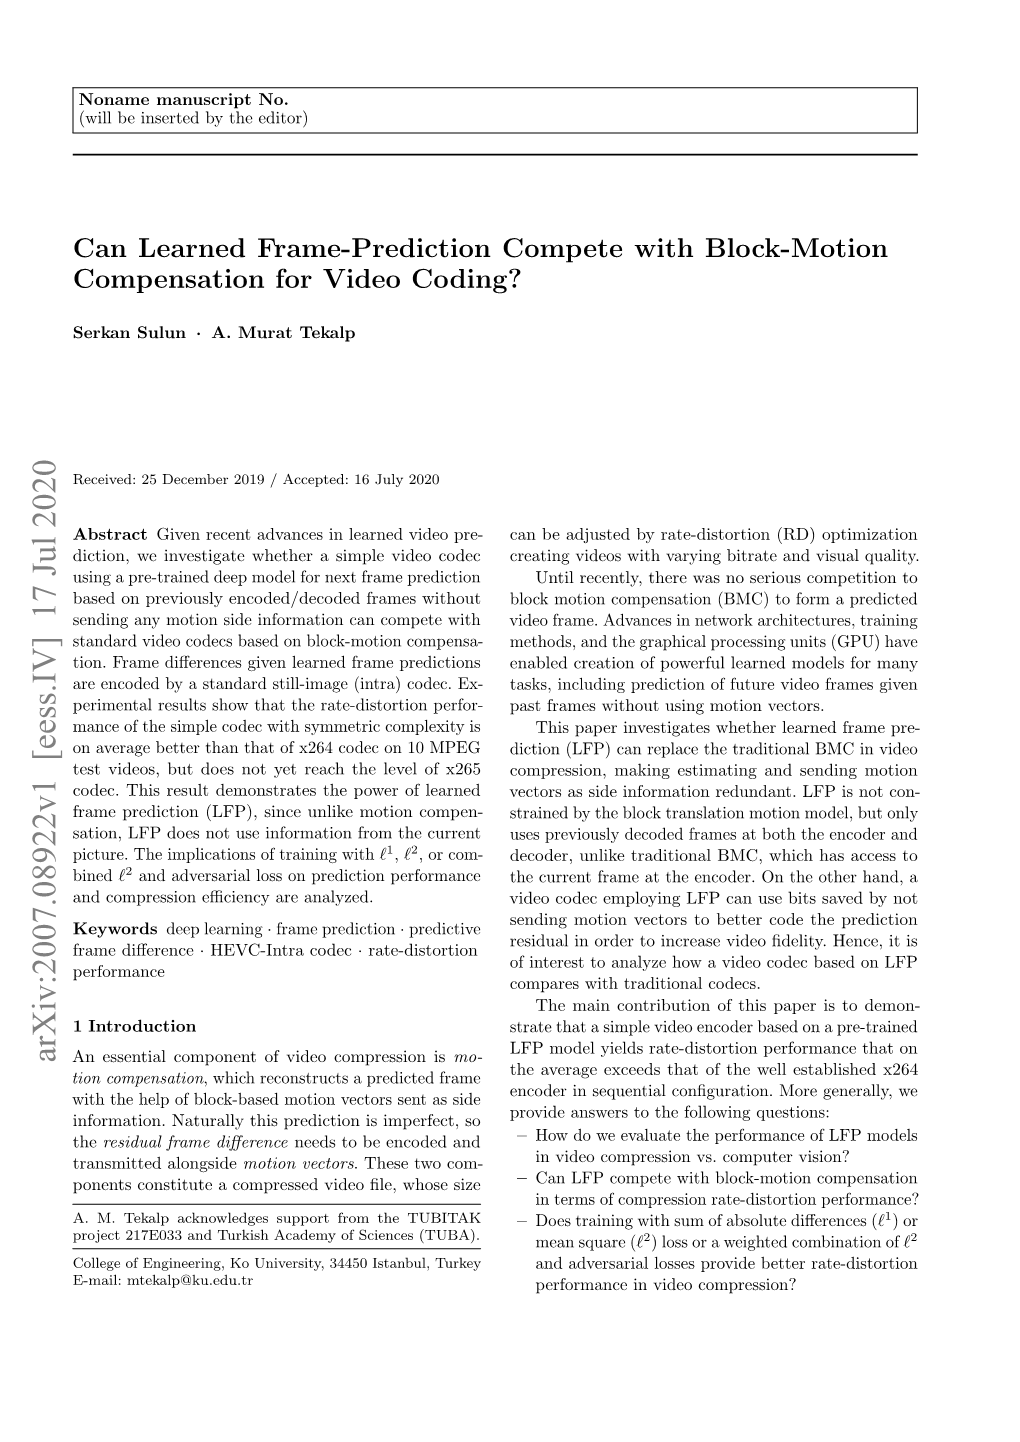 Can Learned Frame-Prediction Compete with Block-Motion Compensation for Video Coding?